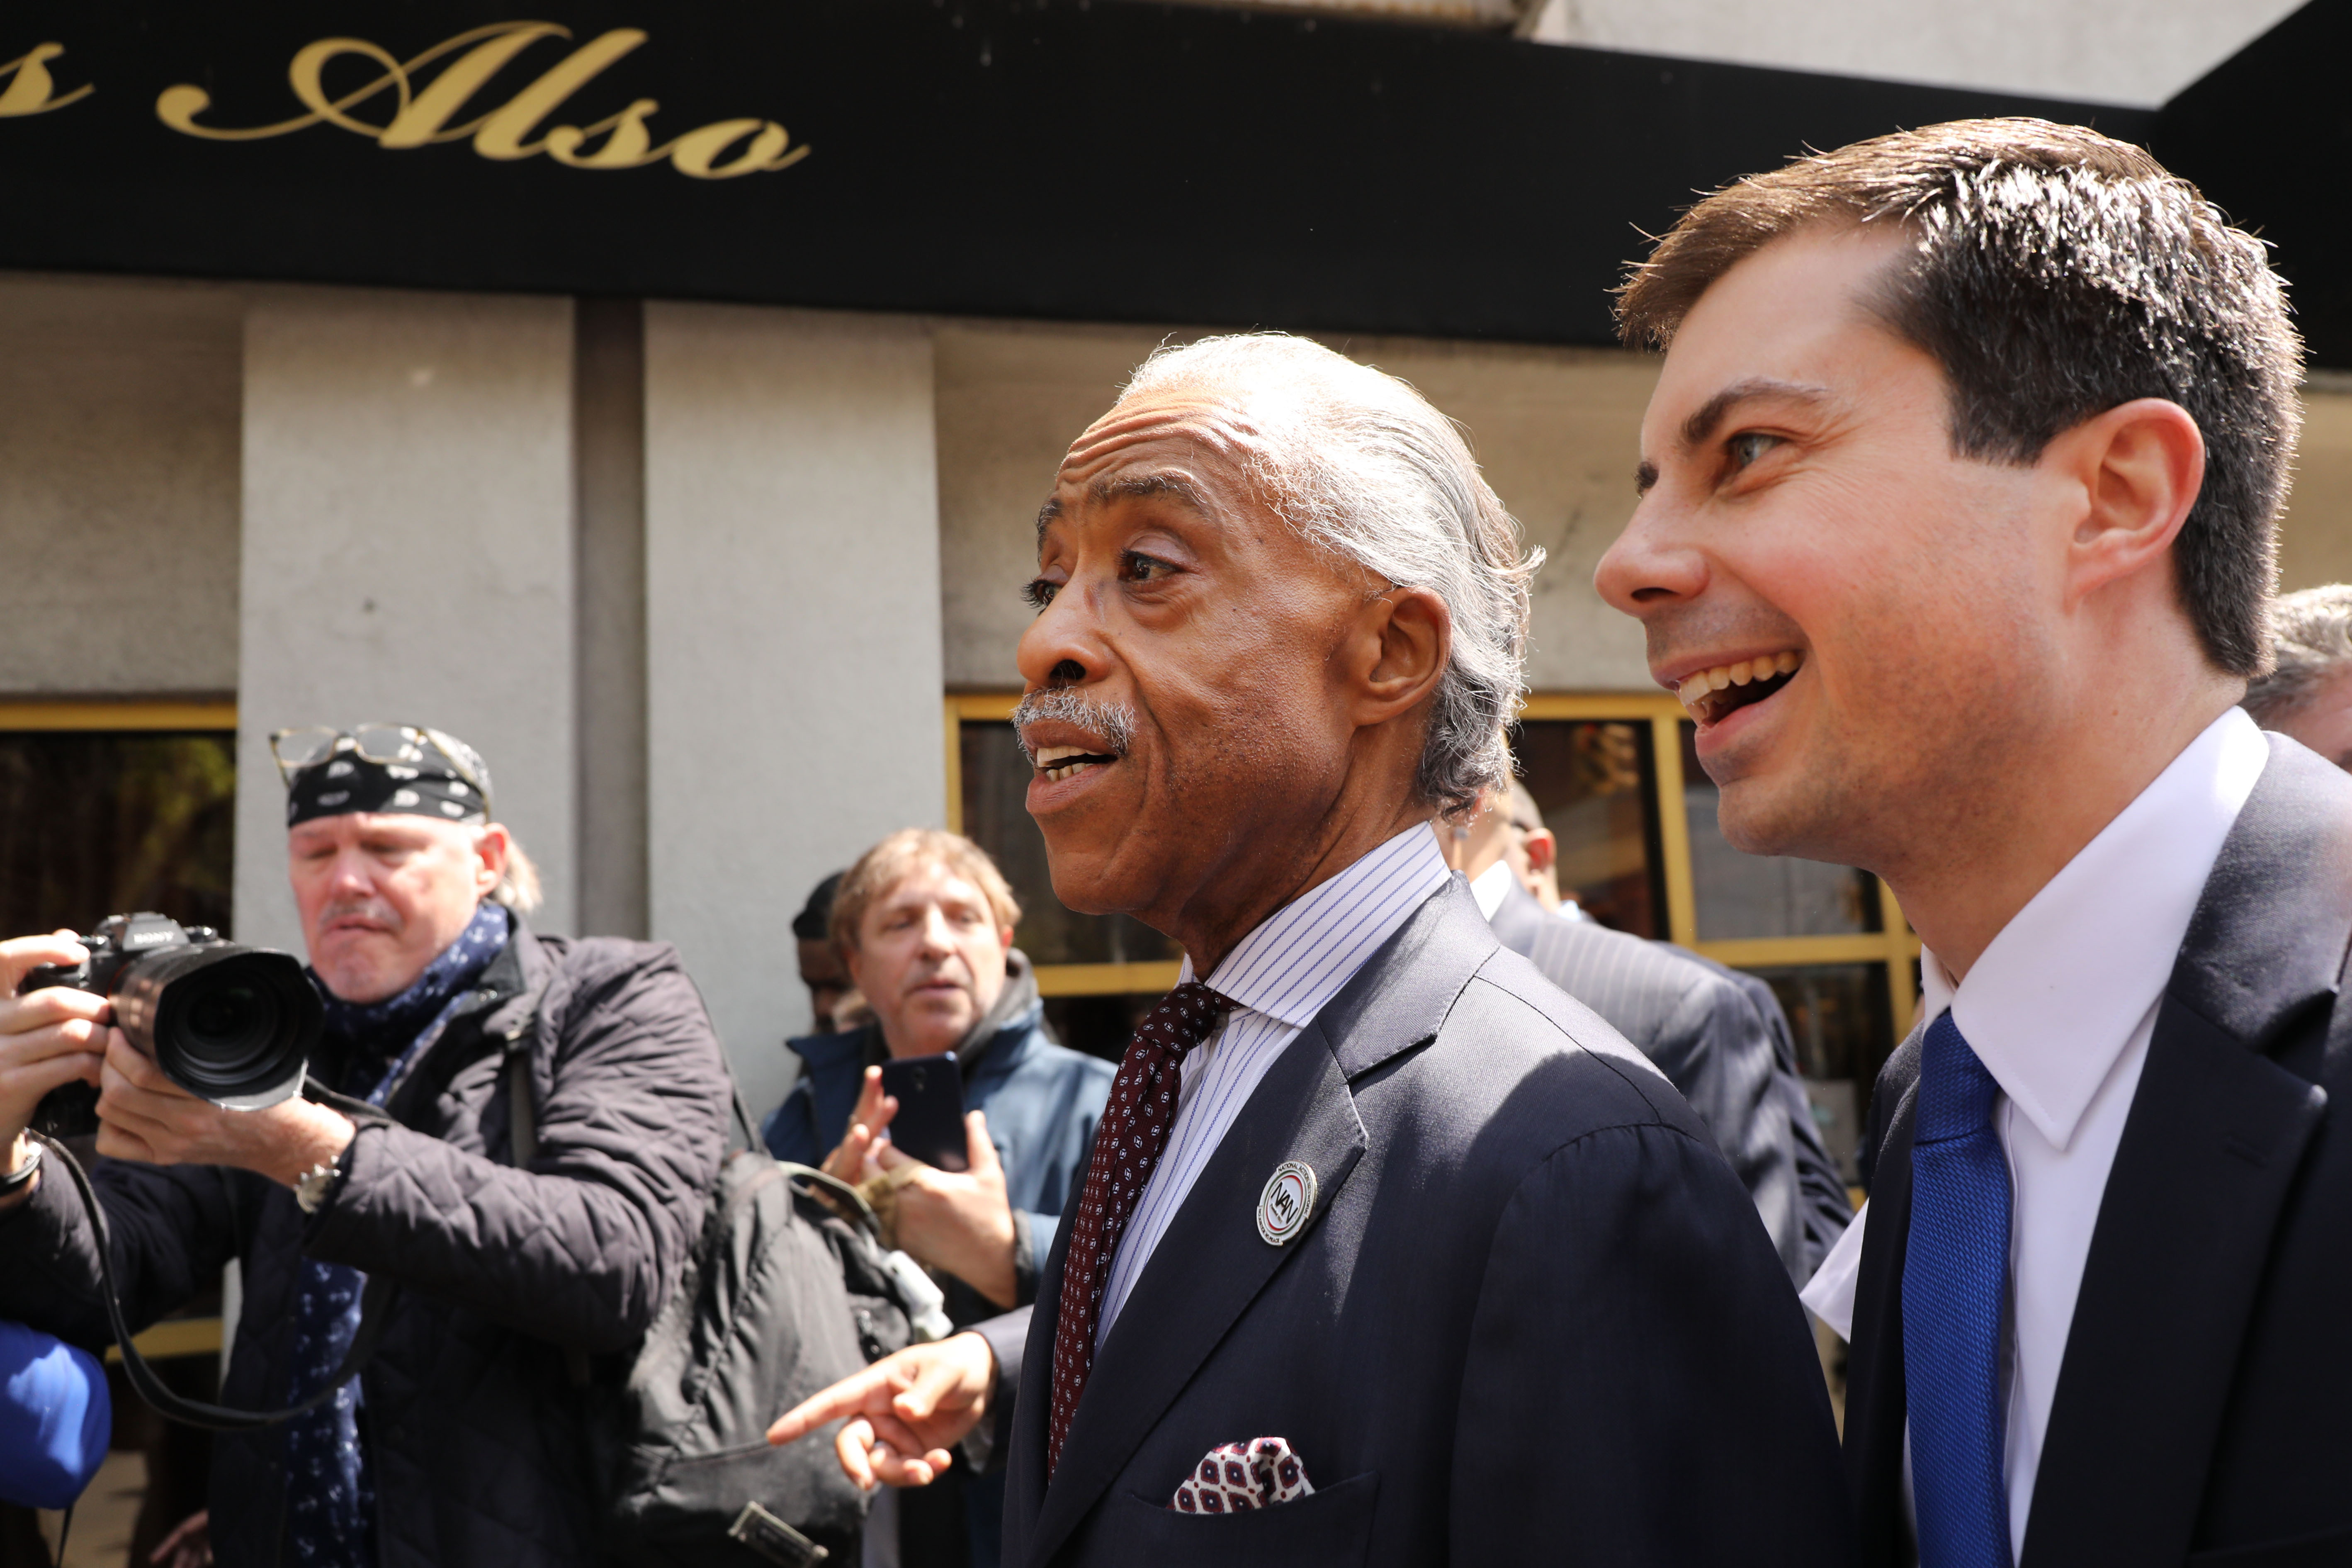 2020 Democratic presidential candidate and South Bend, Indiana, Mayor Pete Buttigieg meets with Reverend Al Sharpton for lunch at famed Sylvia’s Restaurant in Harlem on April 29, 2019 in New York City. (Photo by Spencer Platt/Getty Images)